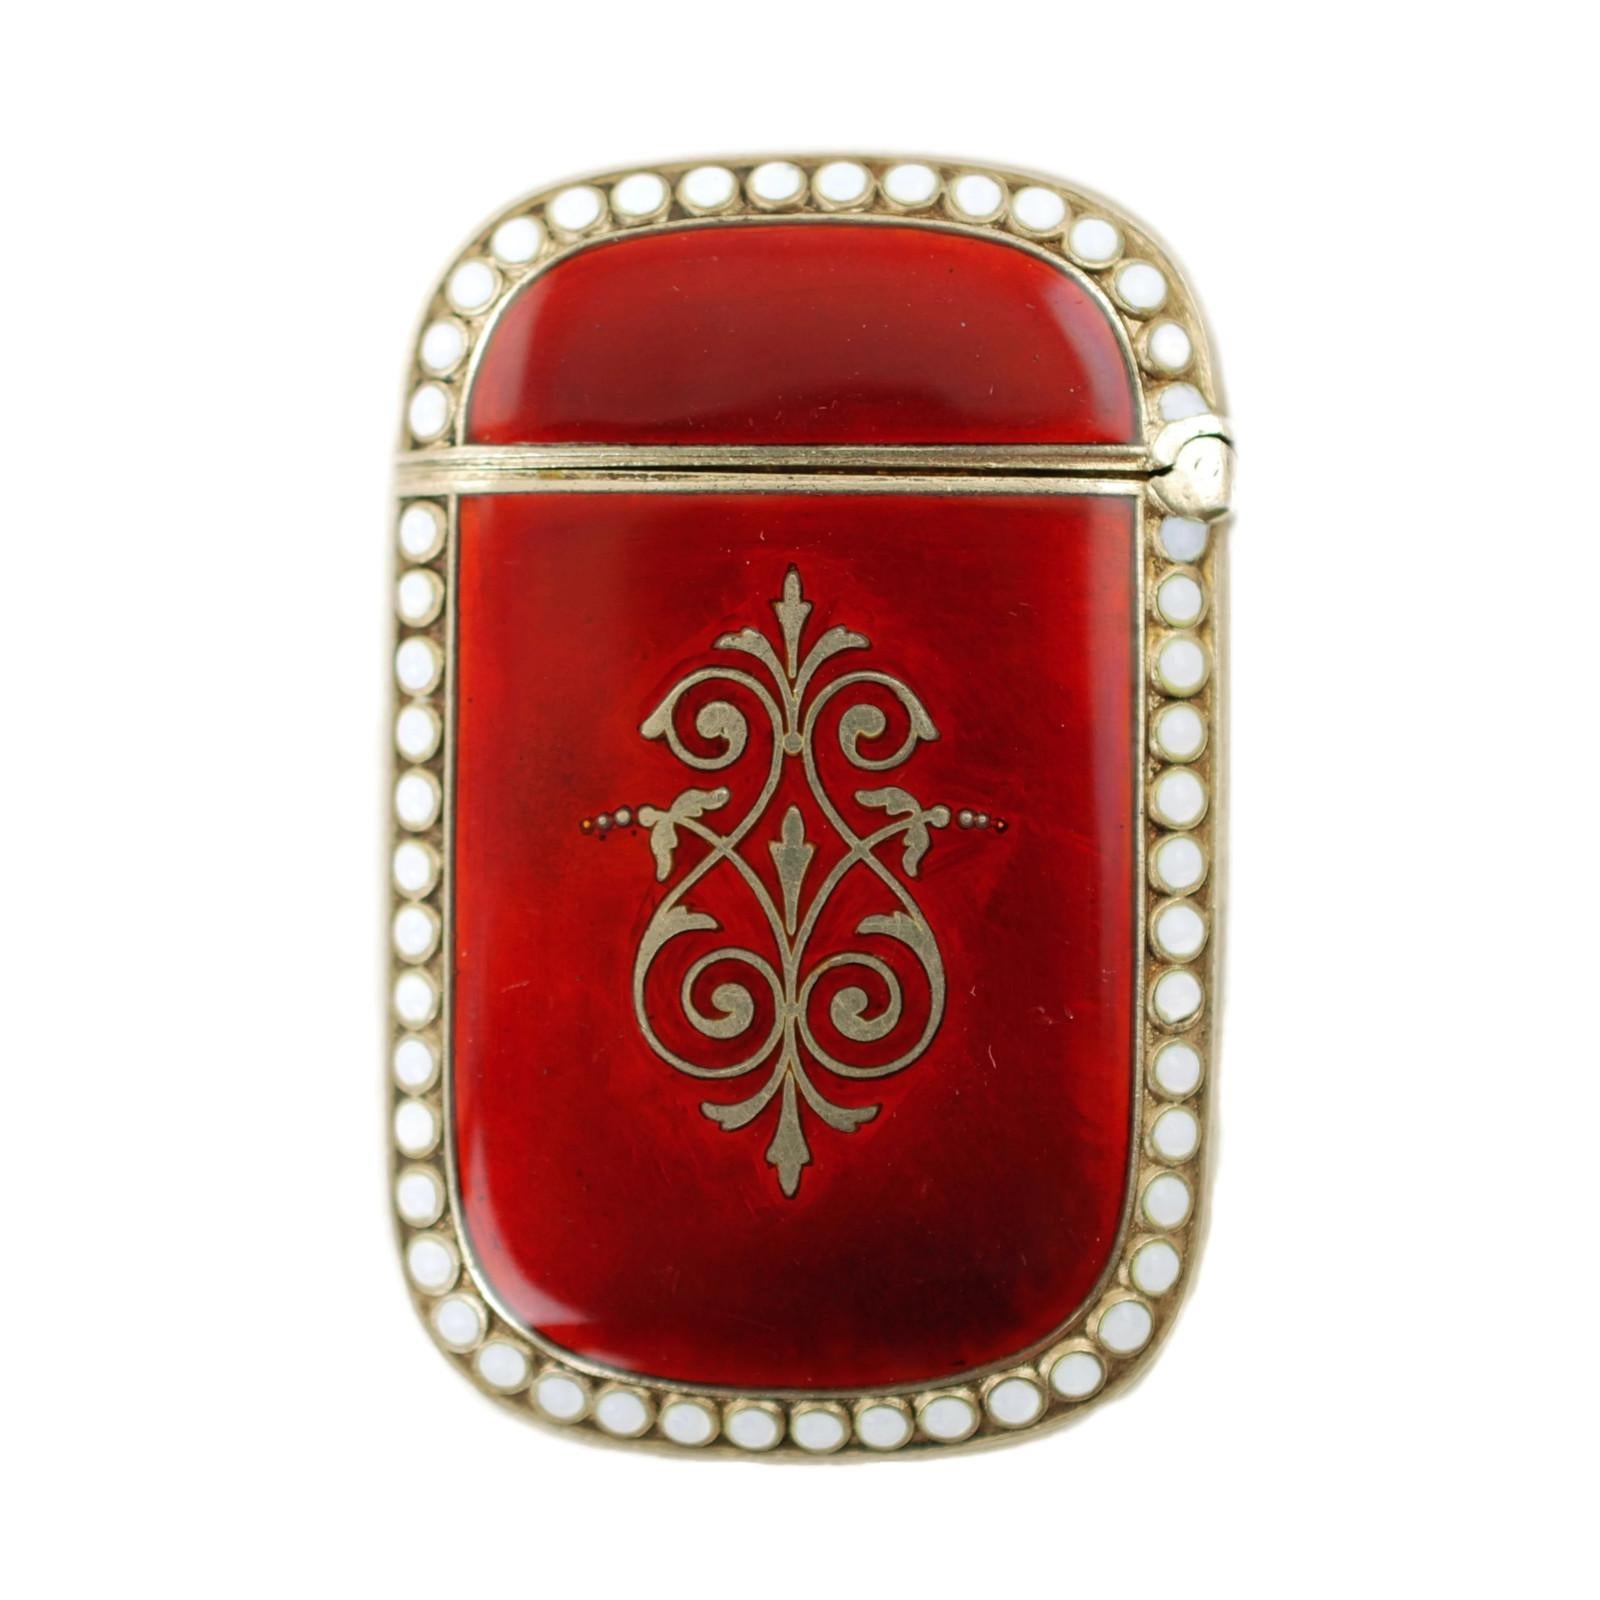 This highly collectible circa 1896 vesta case was made in Oslo, Norway by Arthur David-Andersen. The match safe has a hinged lid and is composed of sterling silver with a vermeil wash. The exterior features crimson enamel decoration with large,